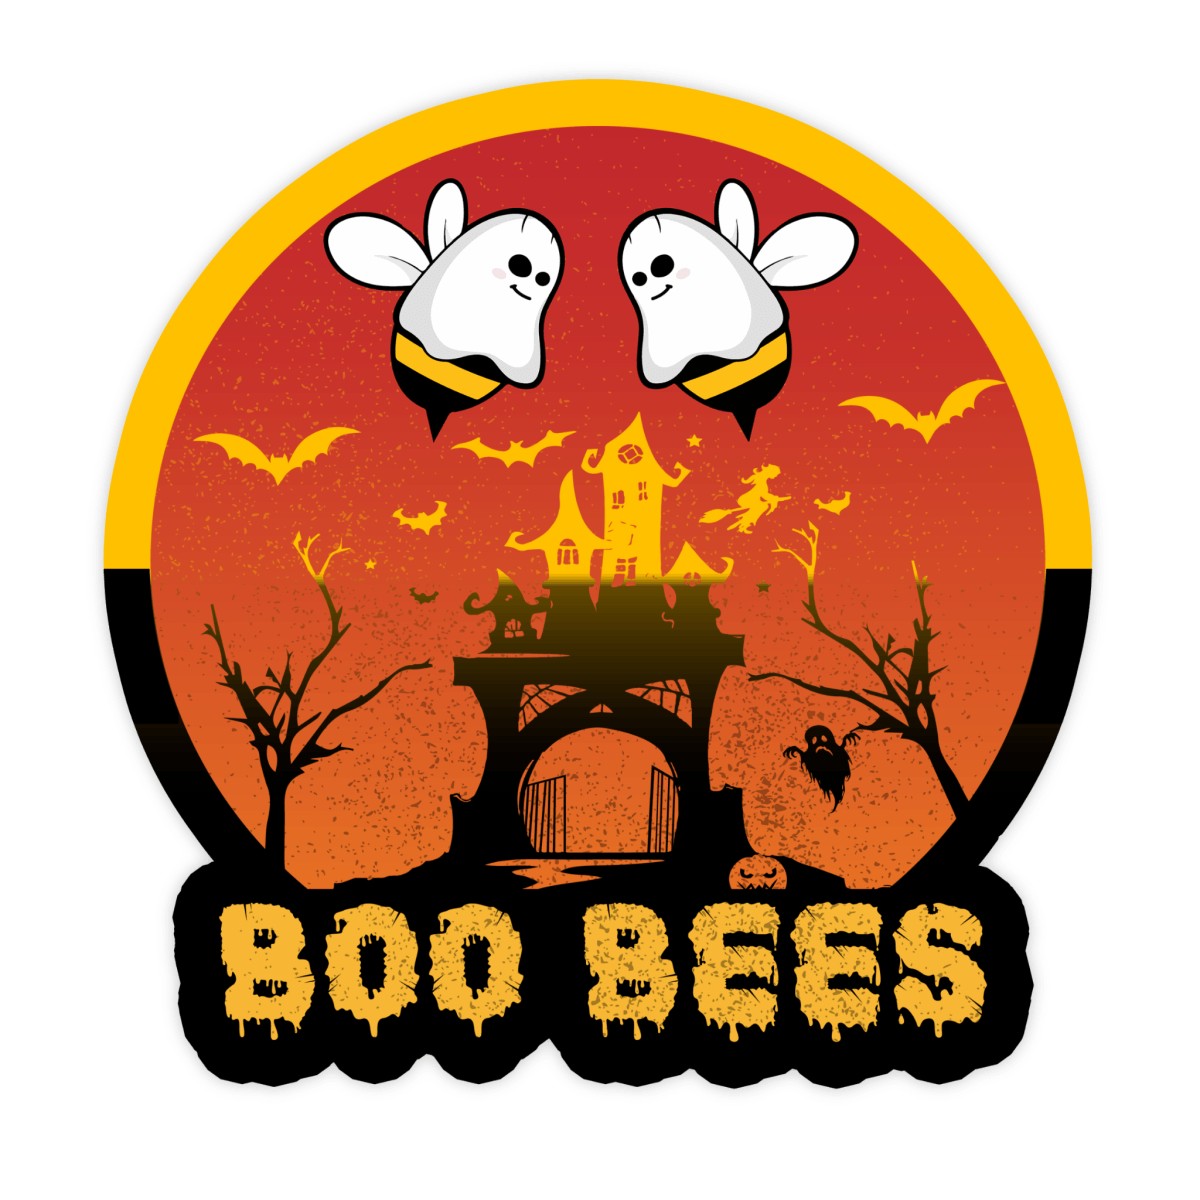 "Boo Bees" Funny Ghost Halloween Meme Sticker - stickerbull"Boo Bees" Funny Ghost Halloween Meme StickerRetail StickerstickerbullstickerbullBooBees#283"Boo Bees" Funny Ghost Halloween Meme Sticker